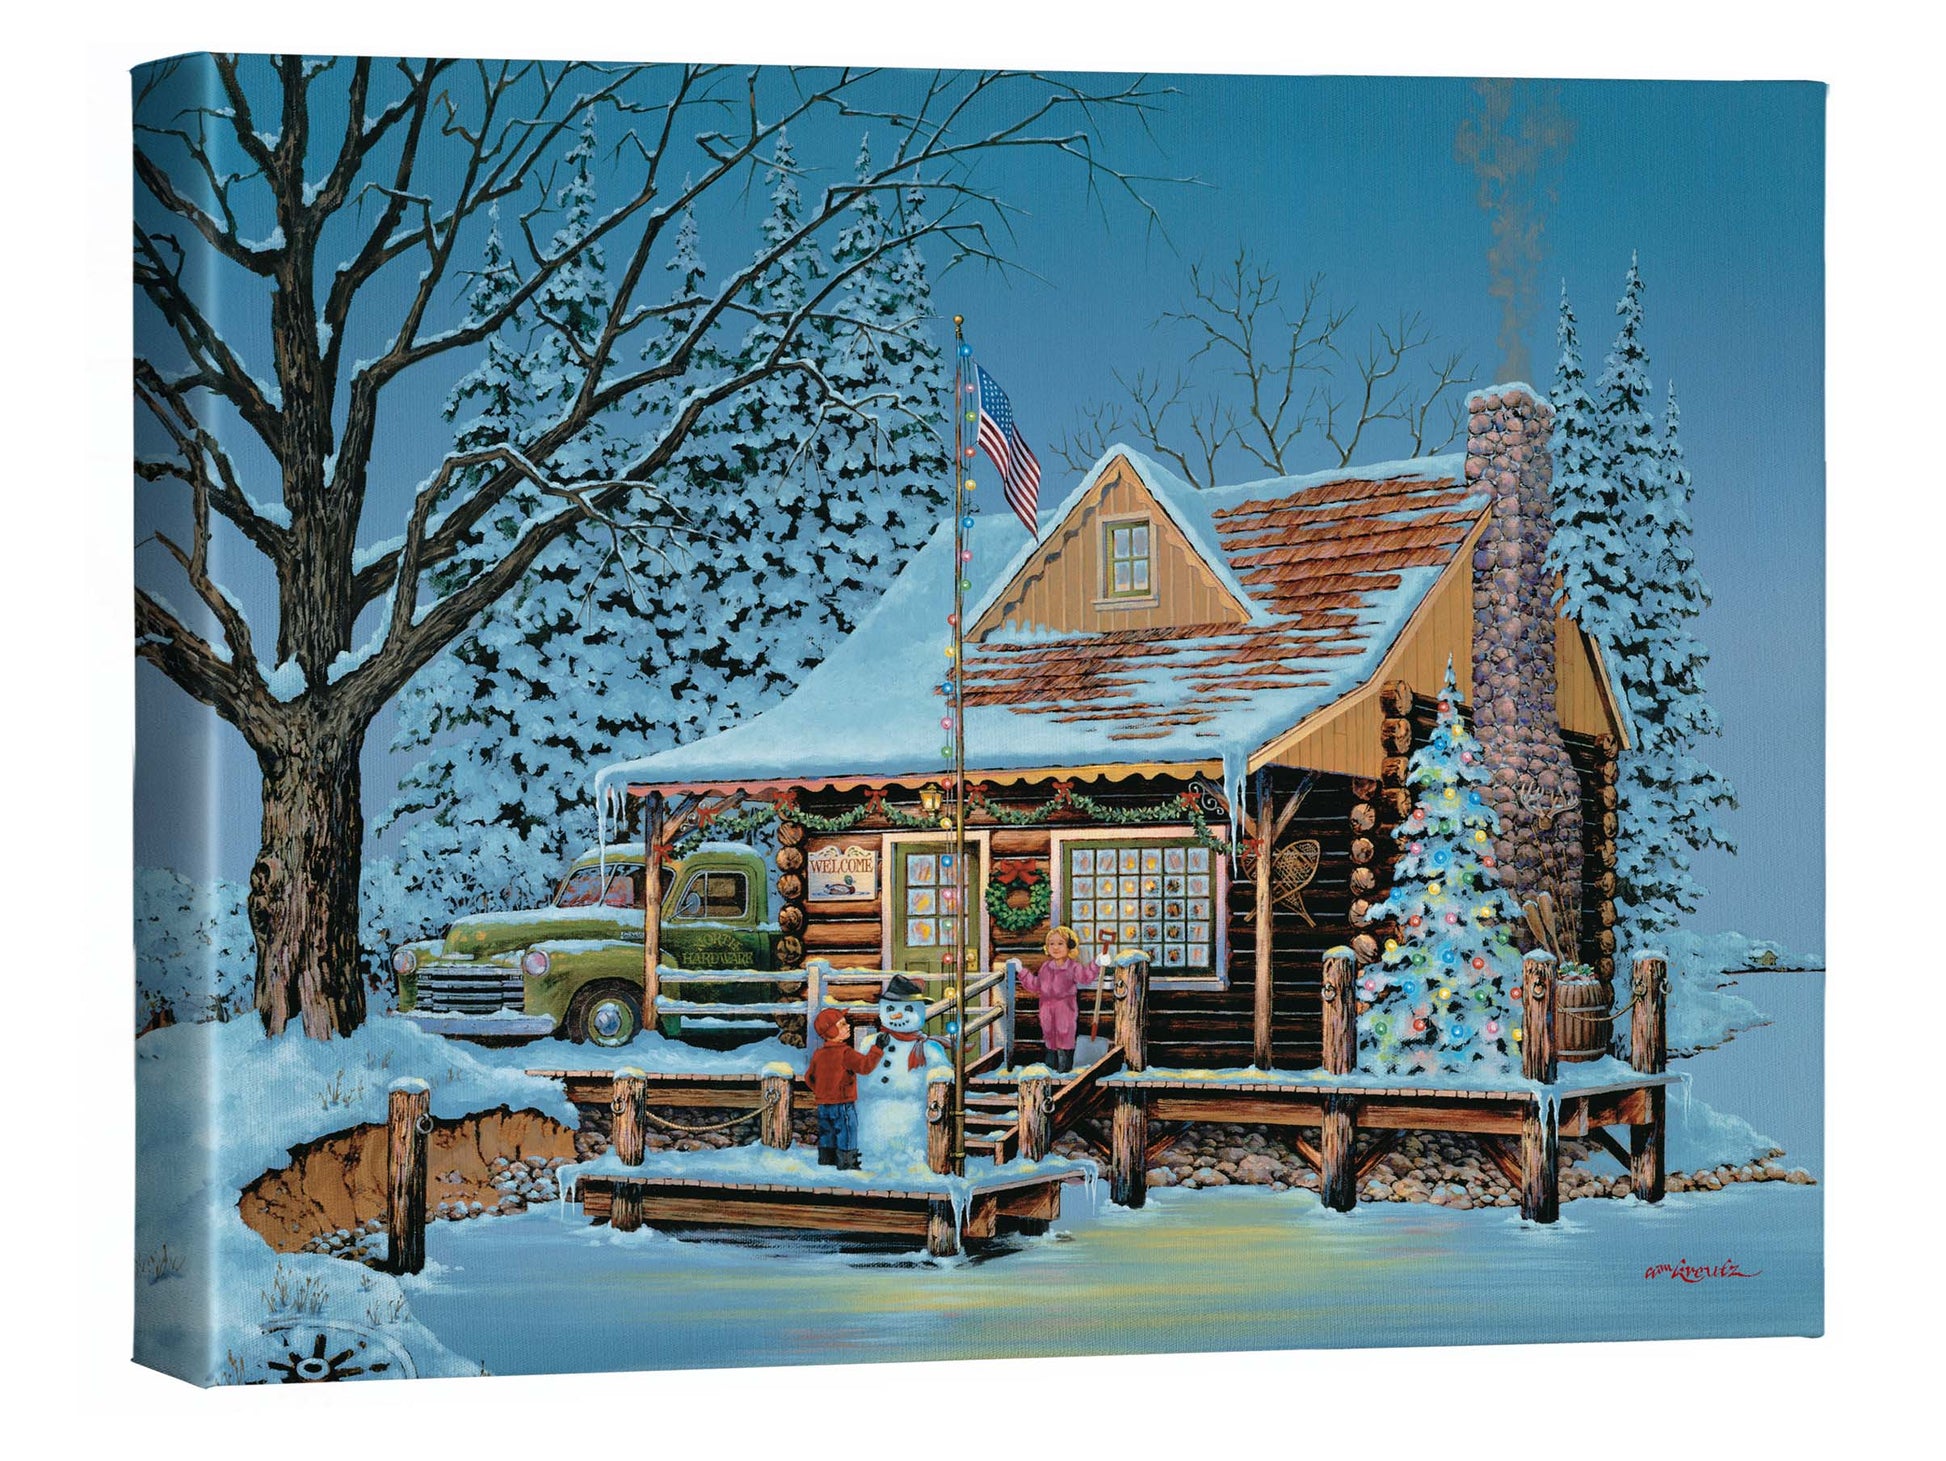 163791_CGW Christmas at Grandpap’s Cabin 16X20.5 Gallery Wrap Canvas_Mocked.jpg